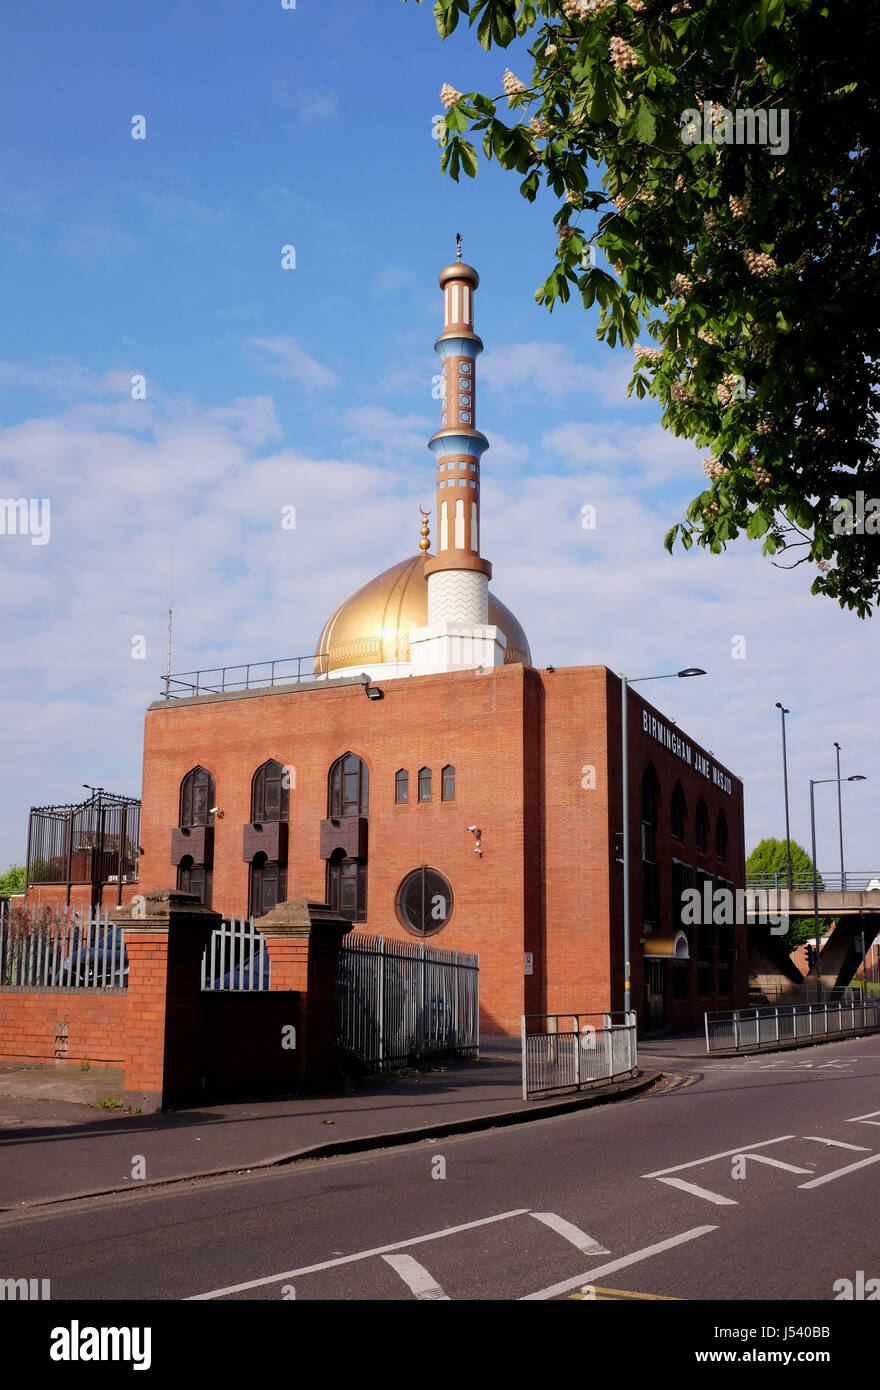 The Birmingham Jame Masjid mosque in the Aston area of the city